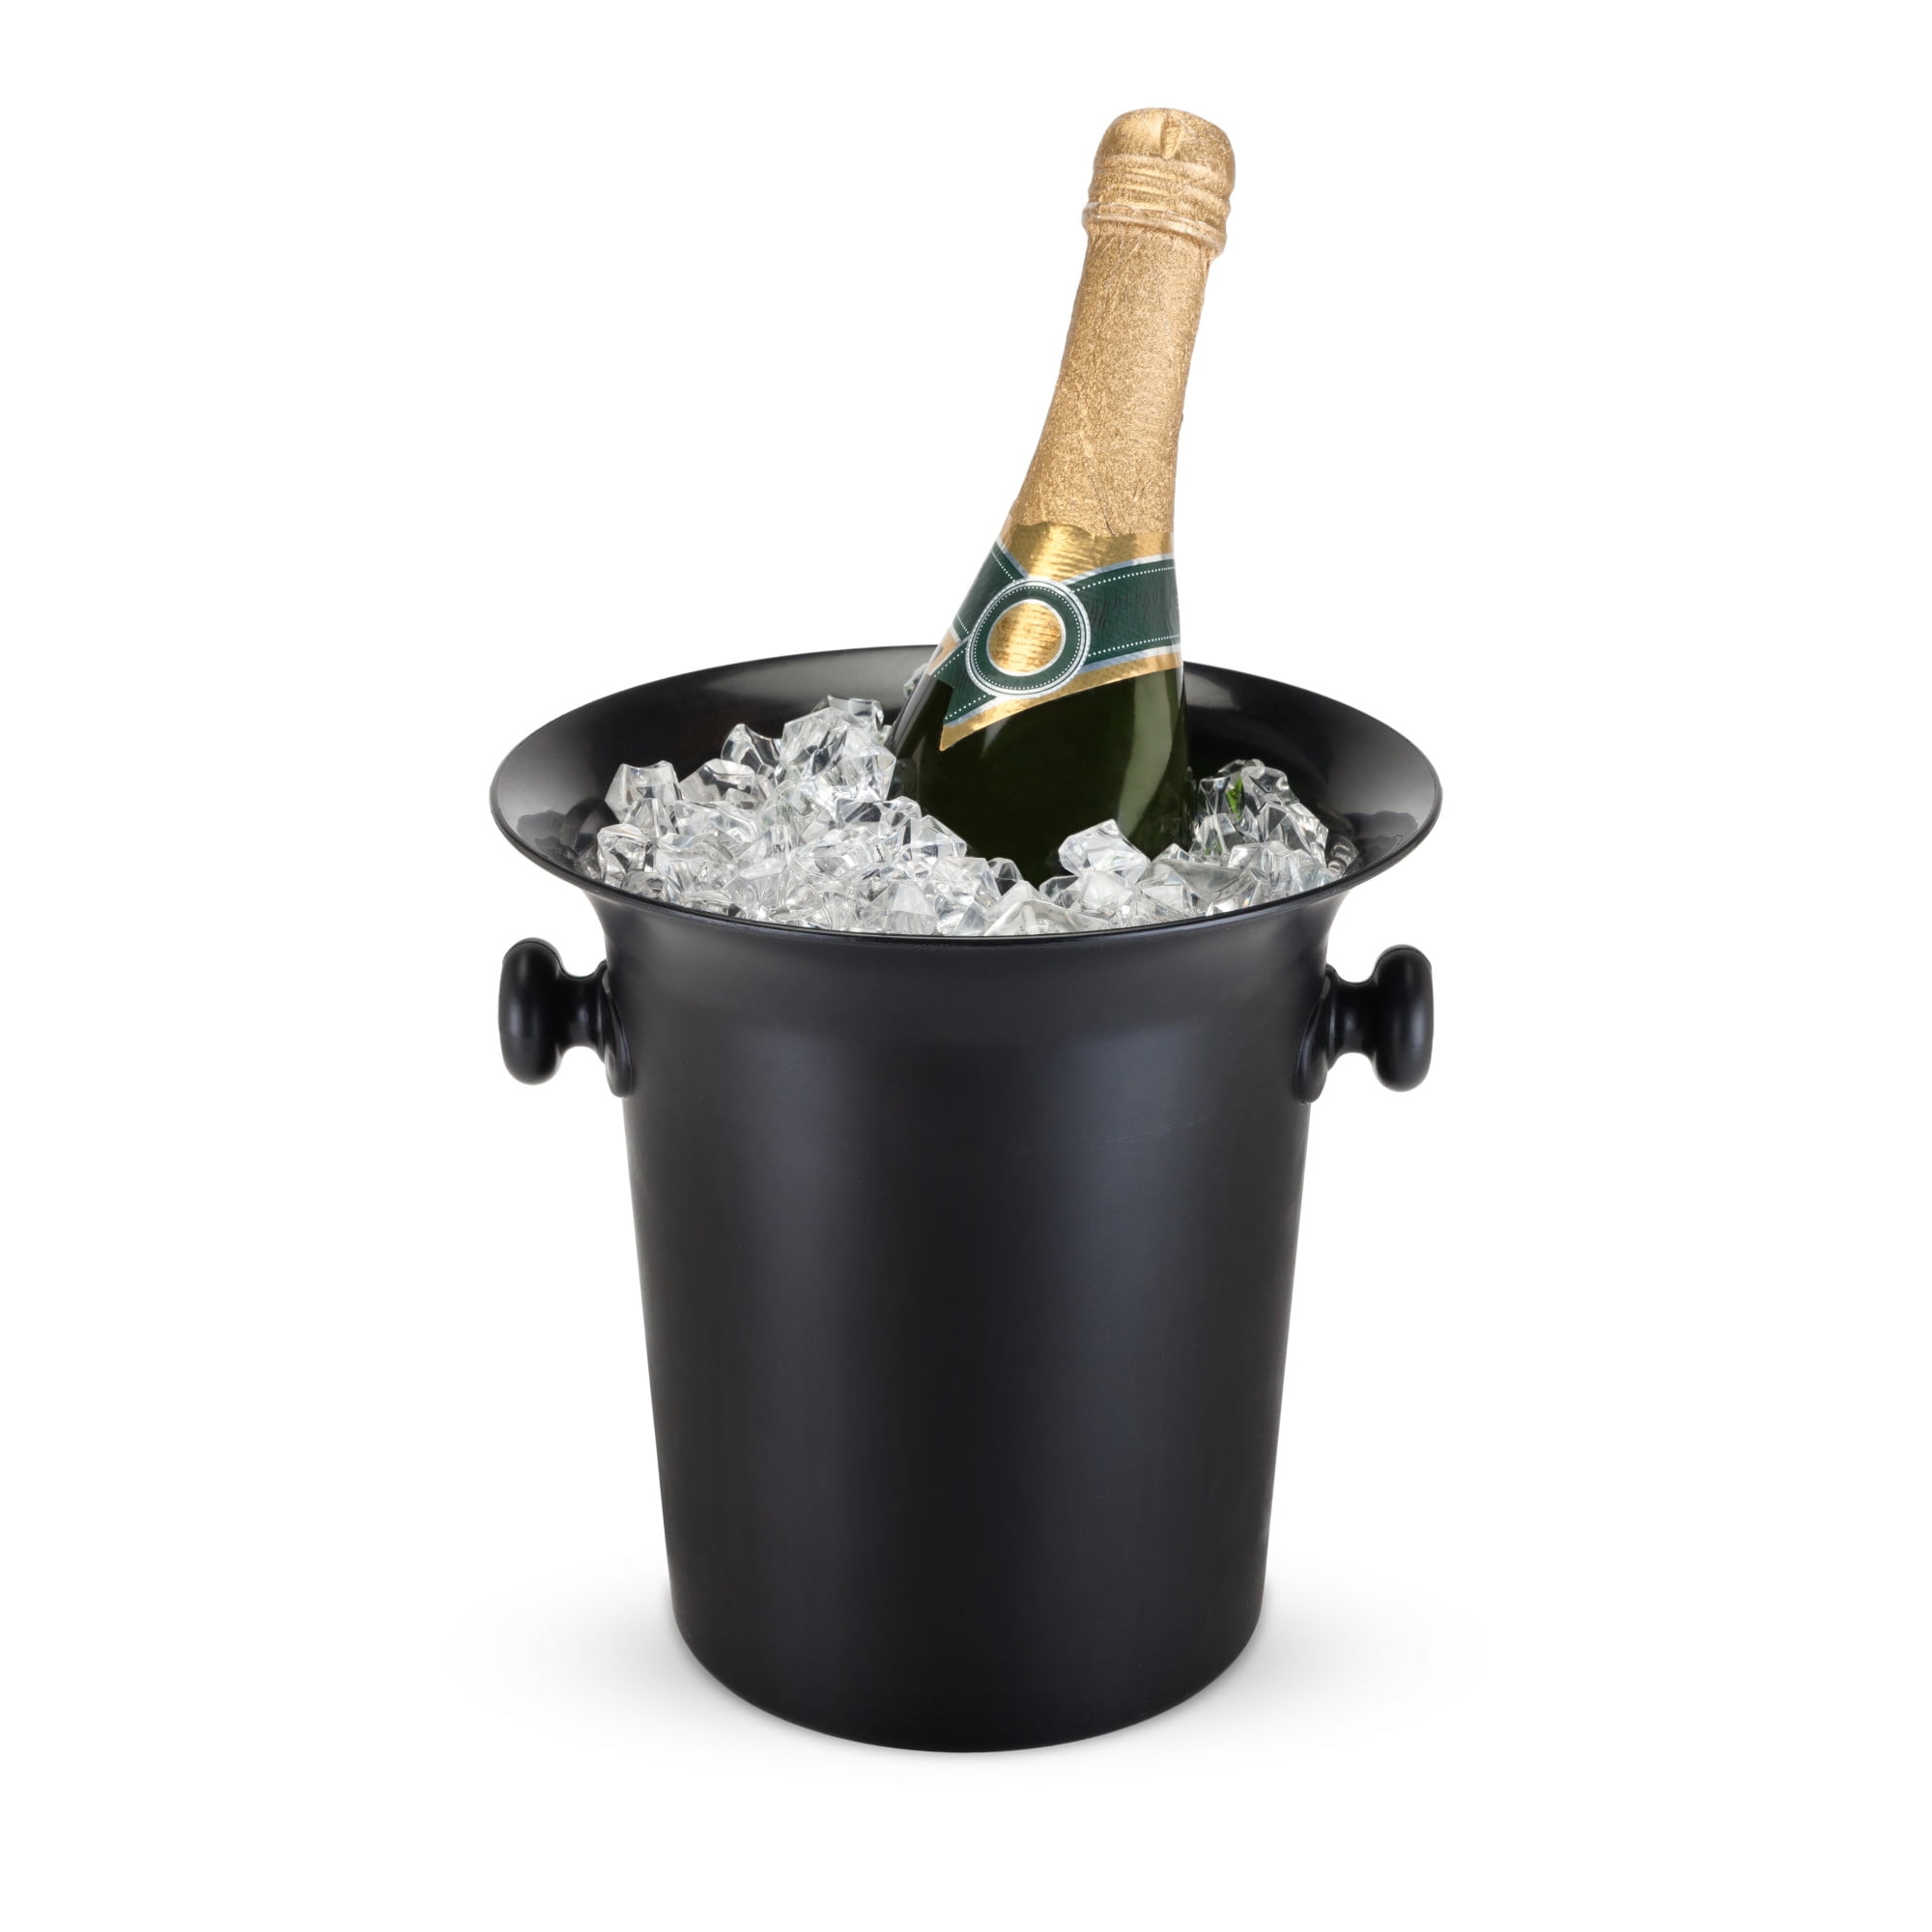 Holding Ice Champagne Barware Cooling ice bucket Walled Insulated Champagne Bucket With Handle And Lid Wine Chiller Great For Cocktail Parties Serverware Wine Color : Gold, Size : 2L